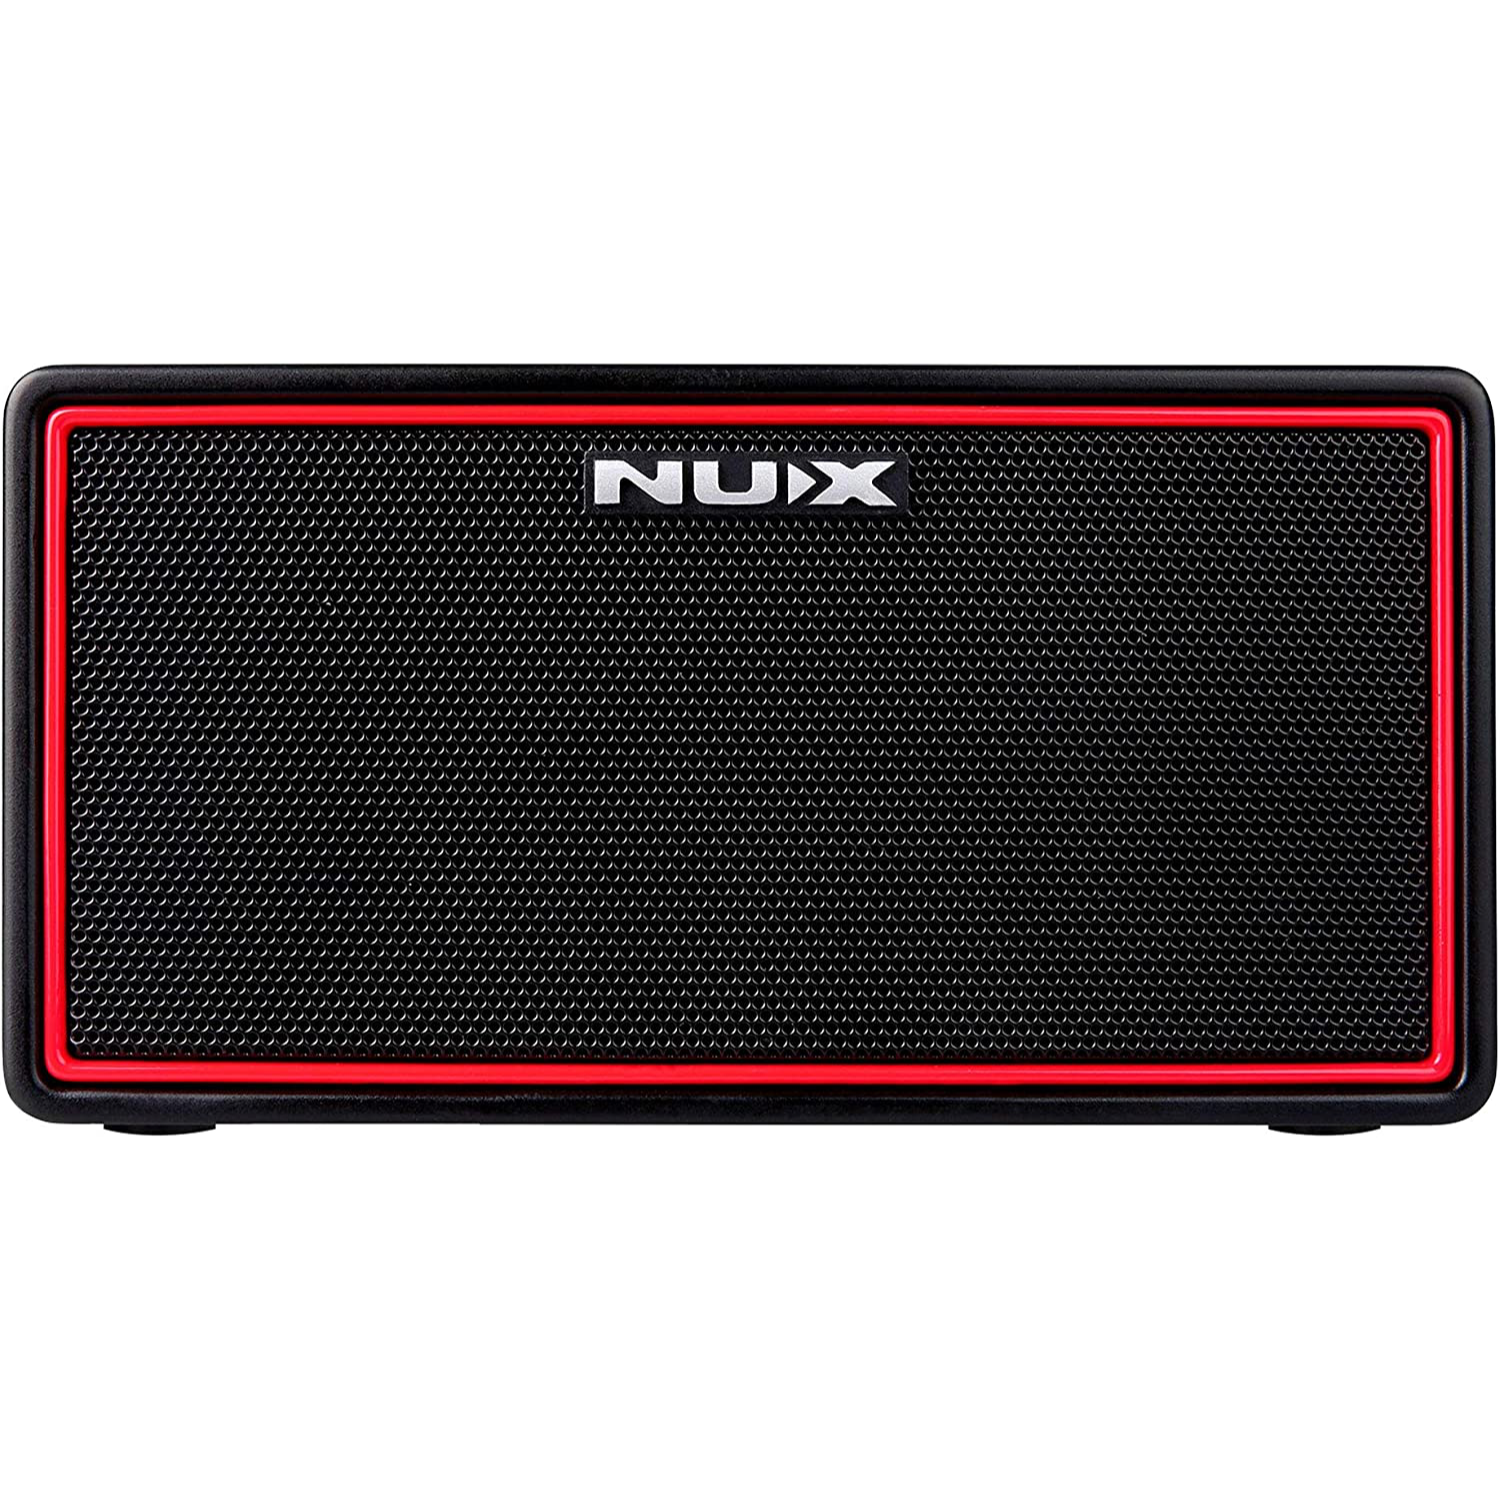 NUXMighty Air Wireless Stereo Modeling Amp…